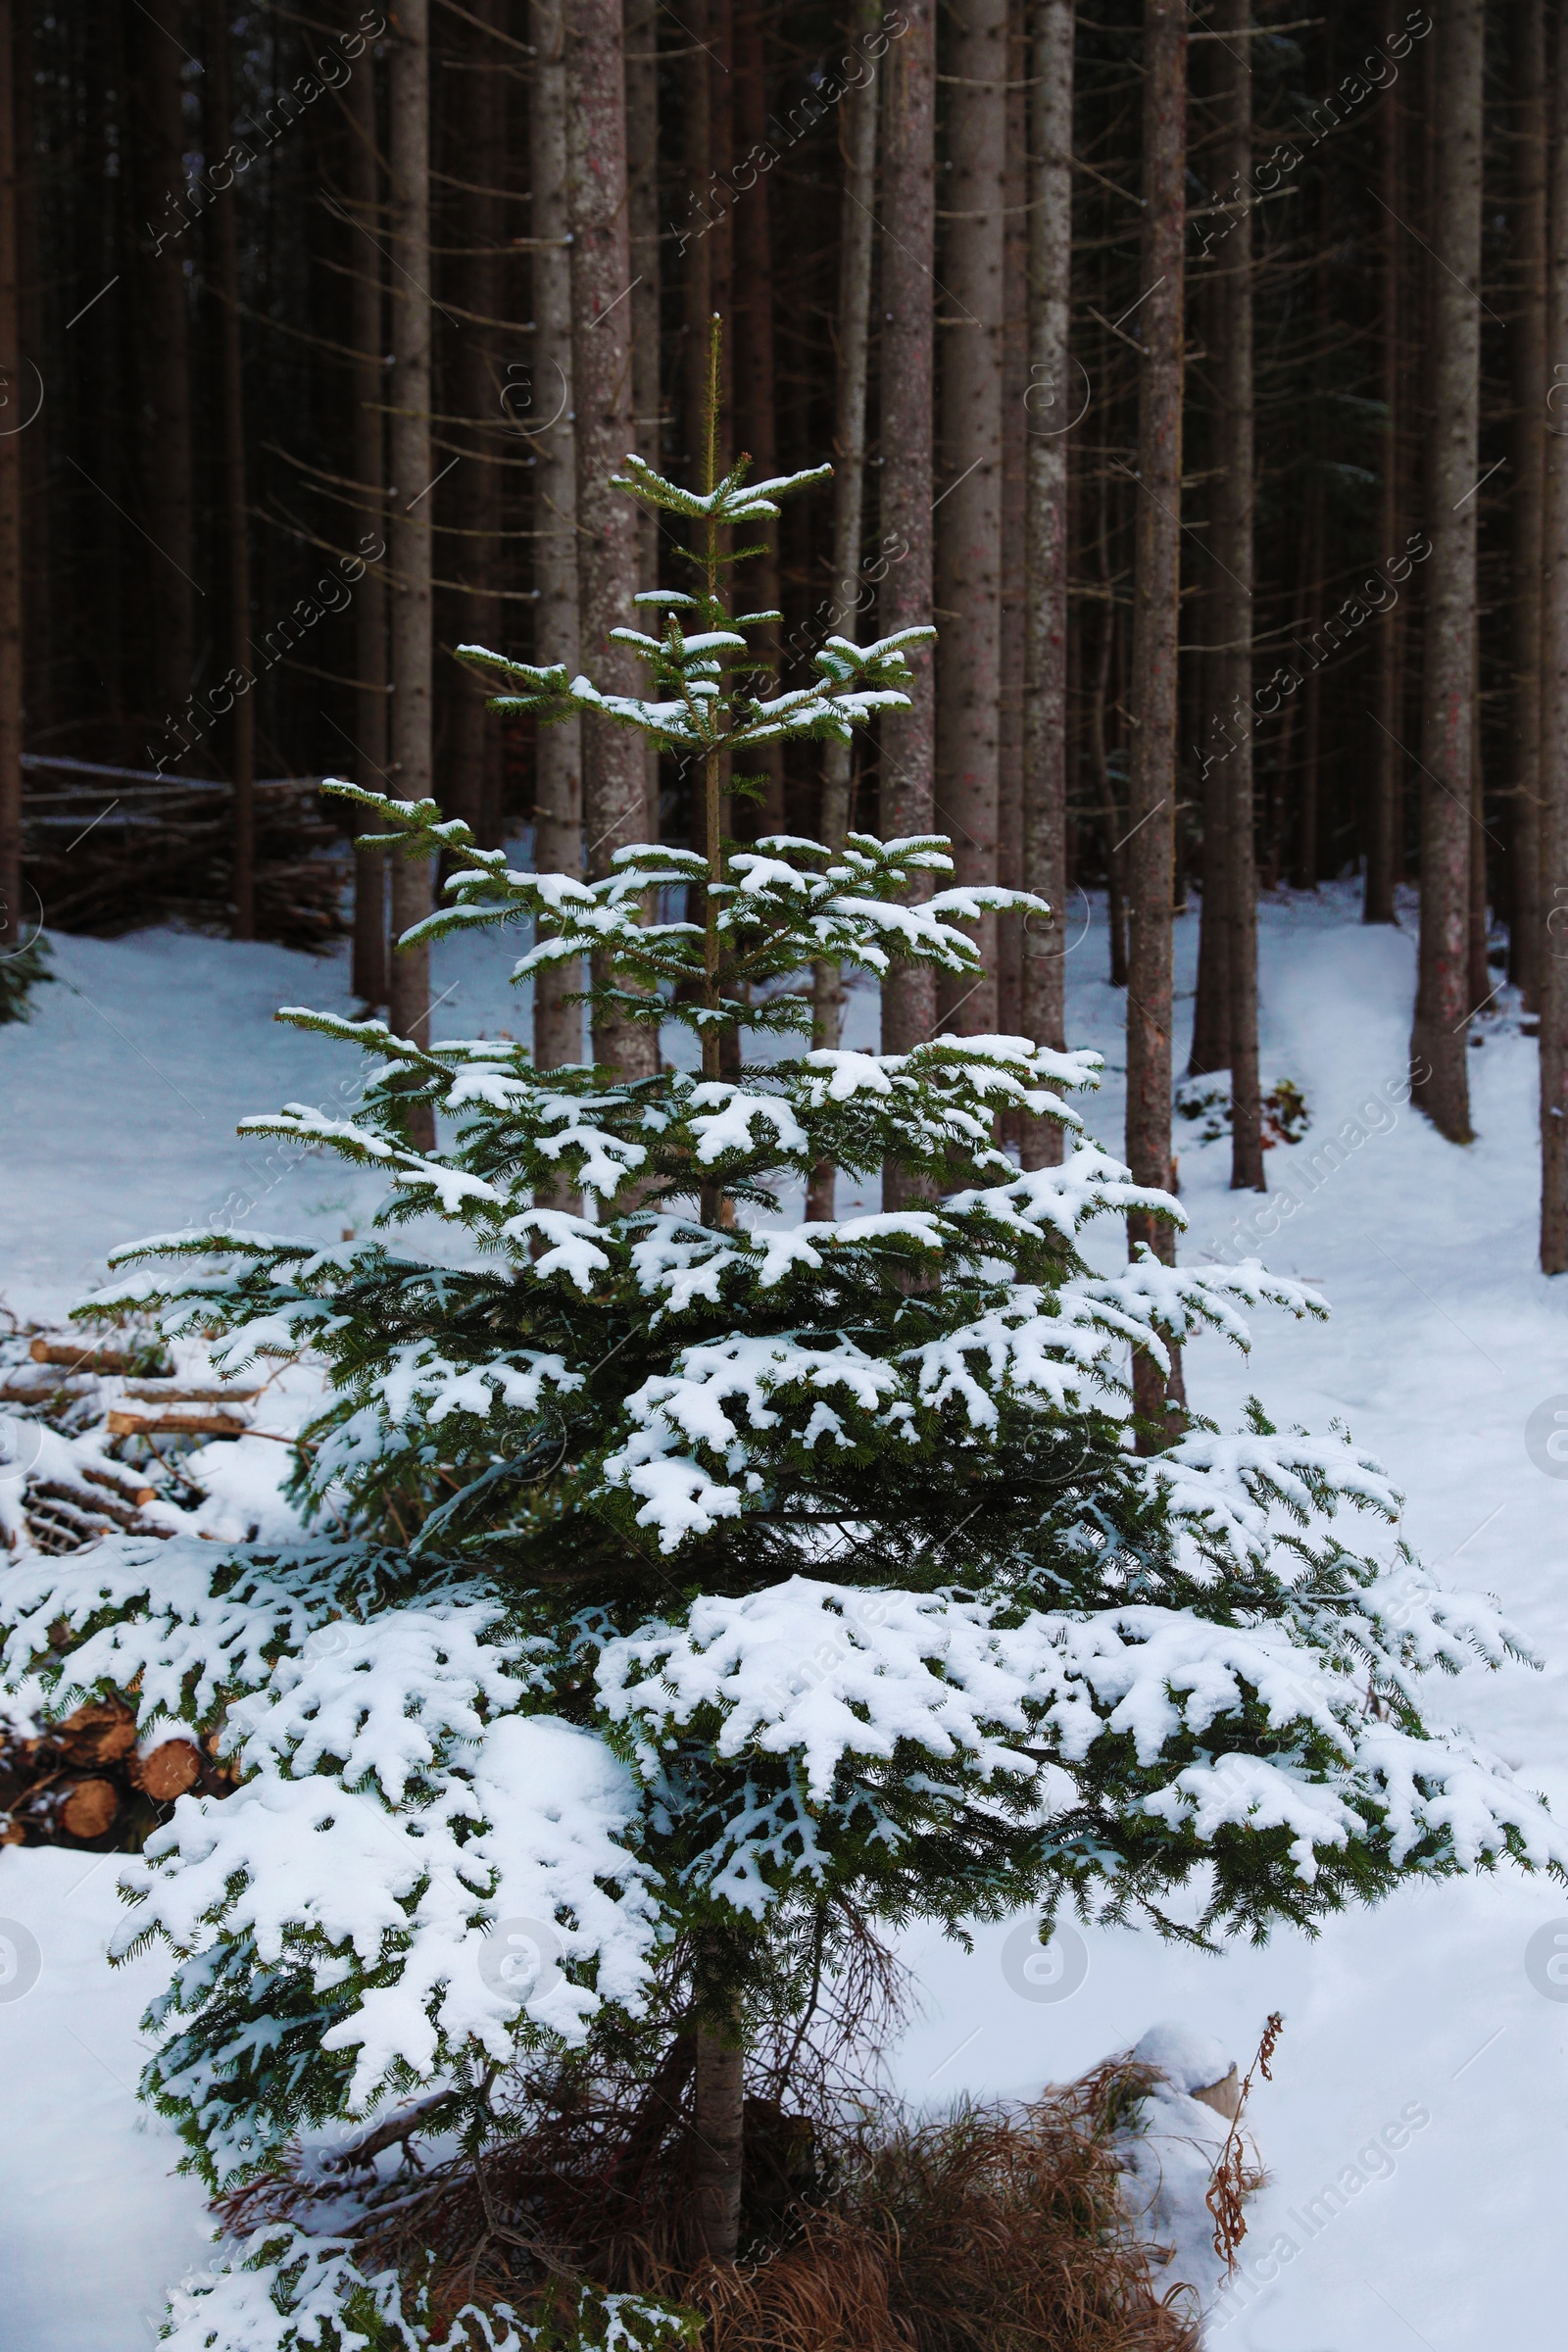 Photo of Fir tree and snow on ground in forest